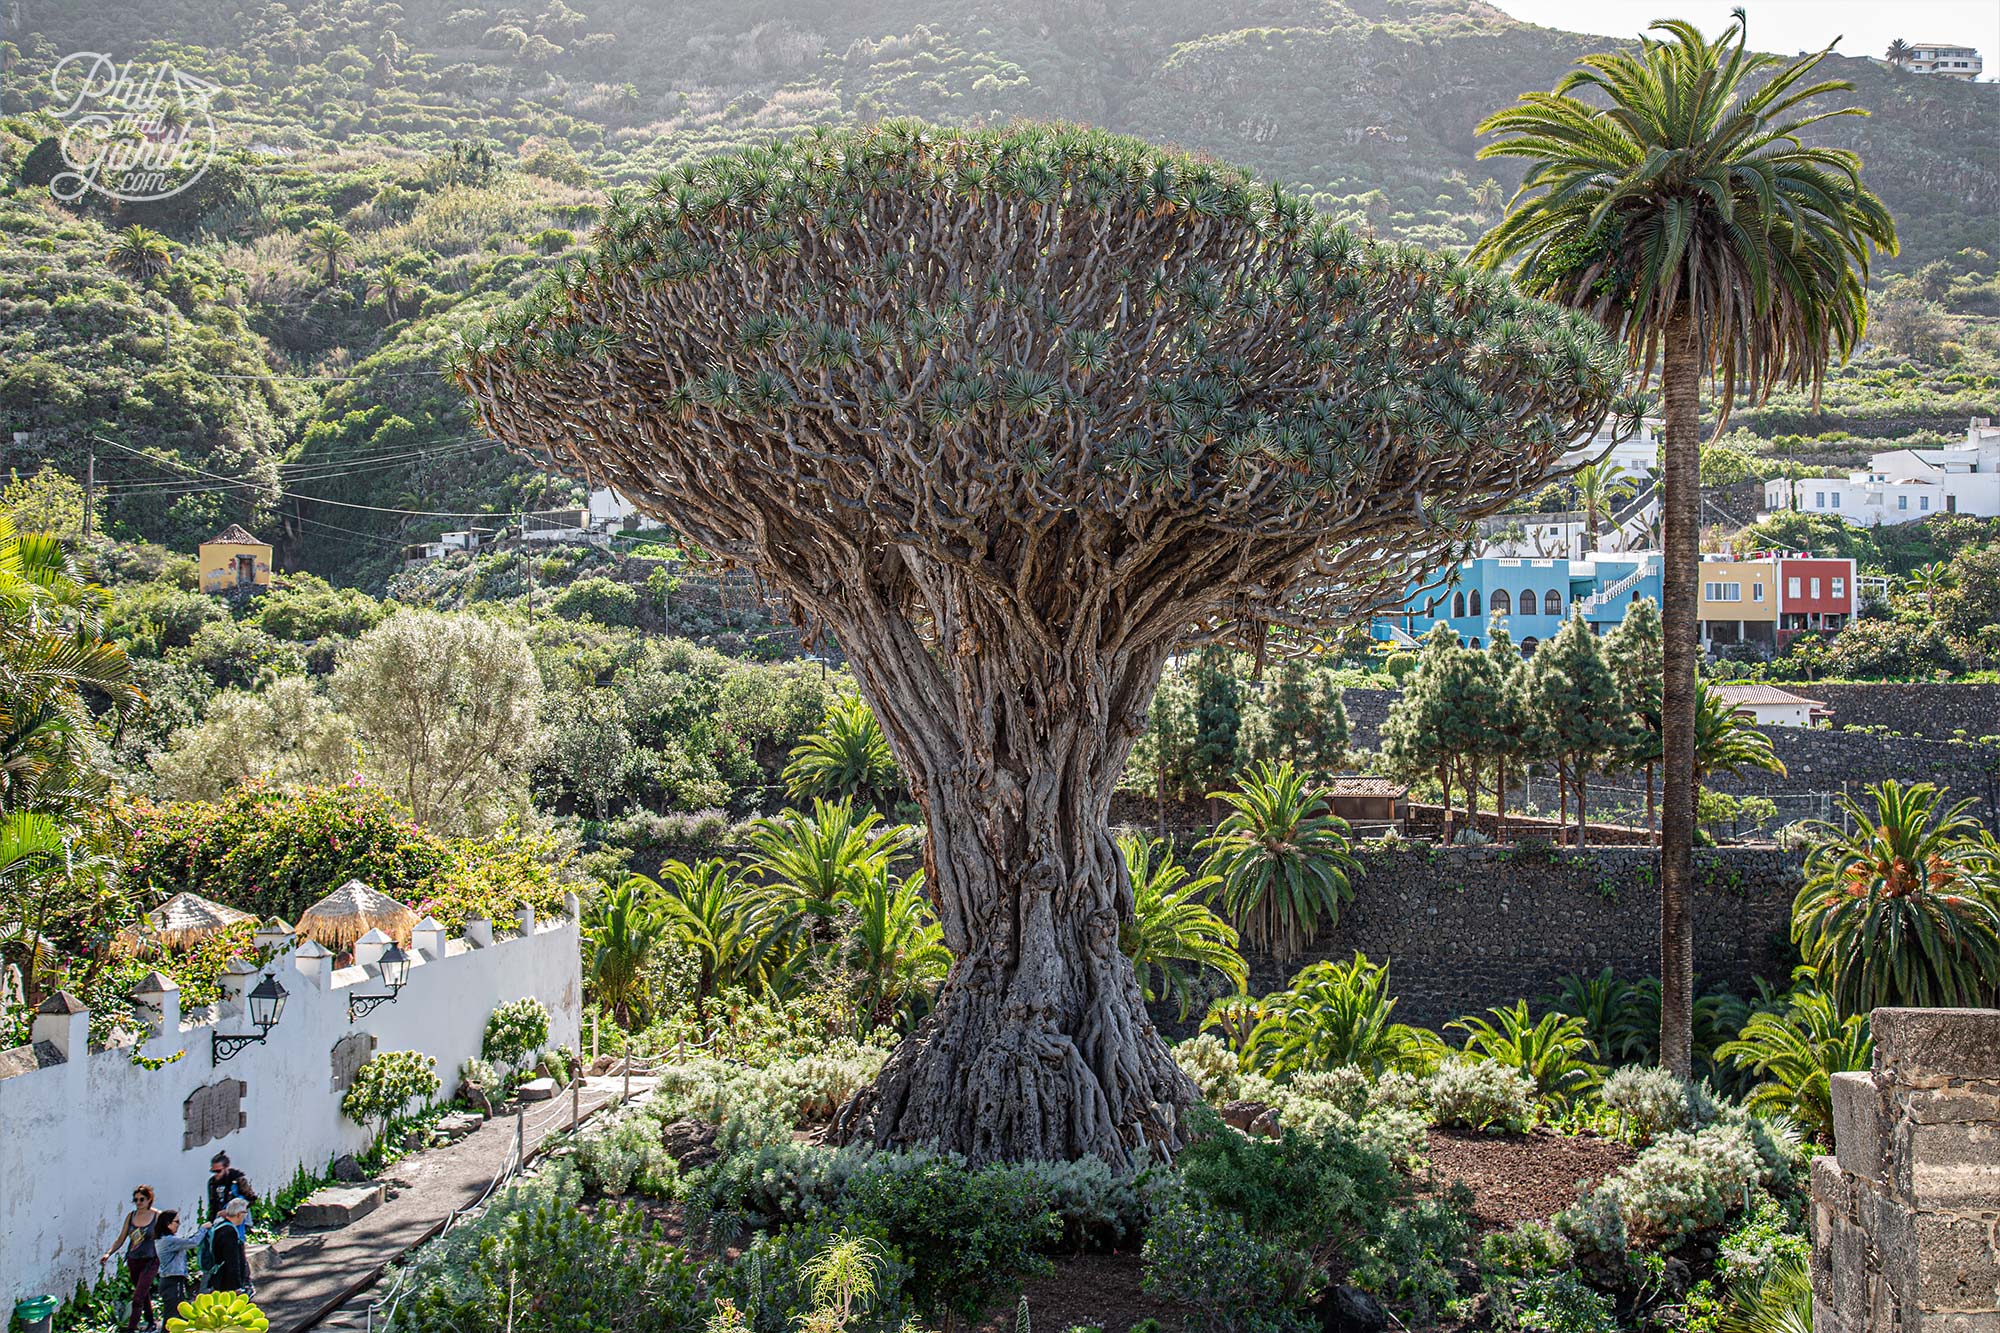 The Millenary Dragon Tree is the oldest living specimen in the world